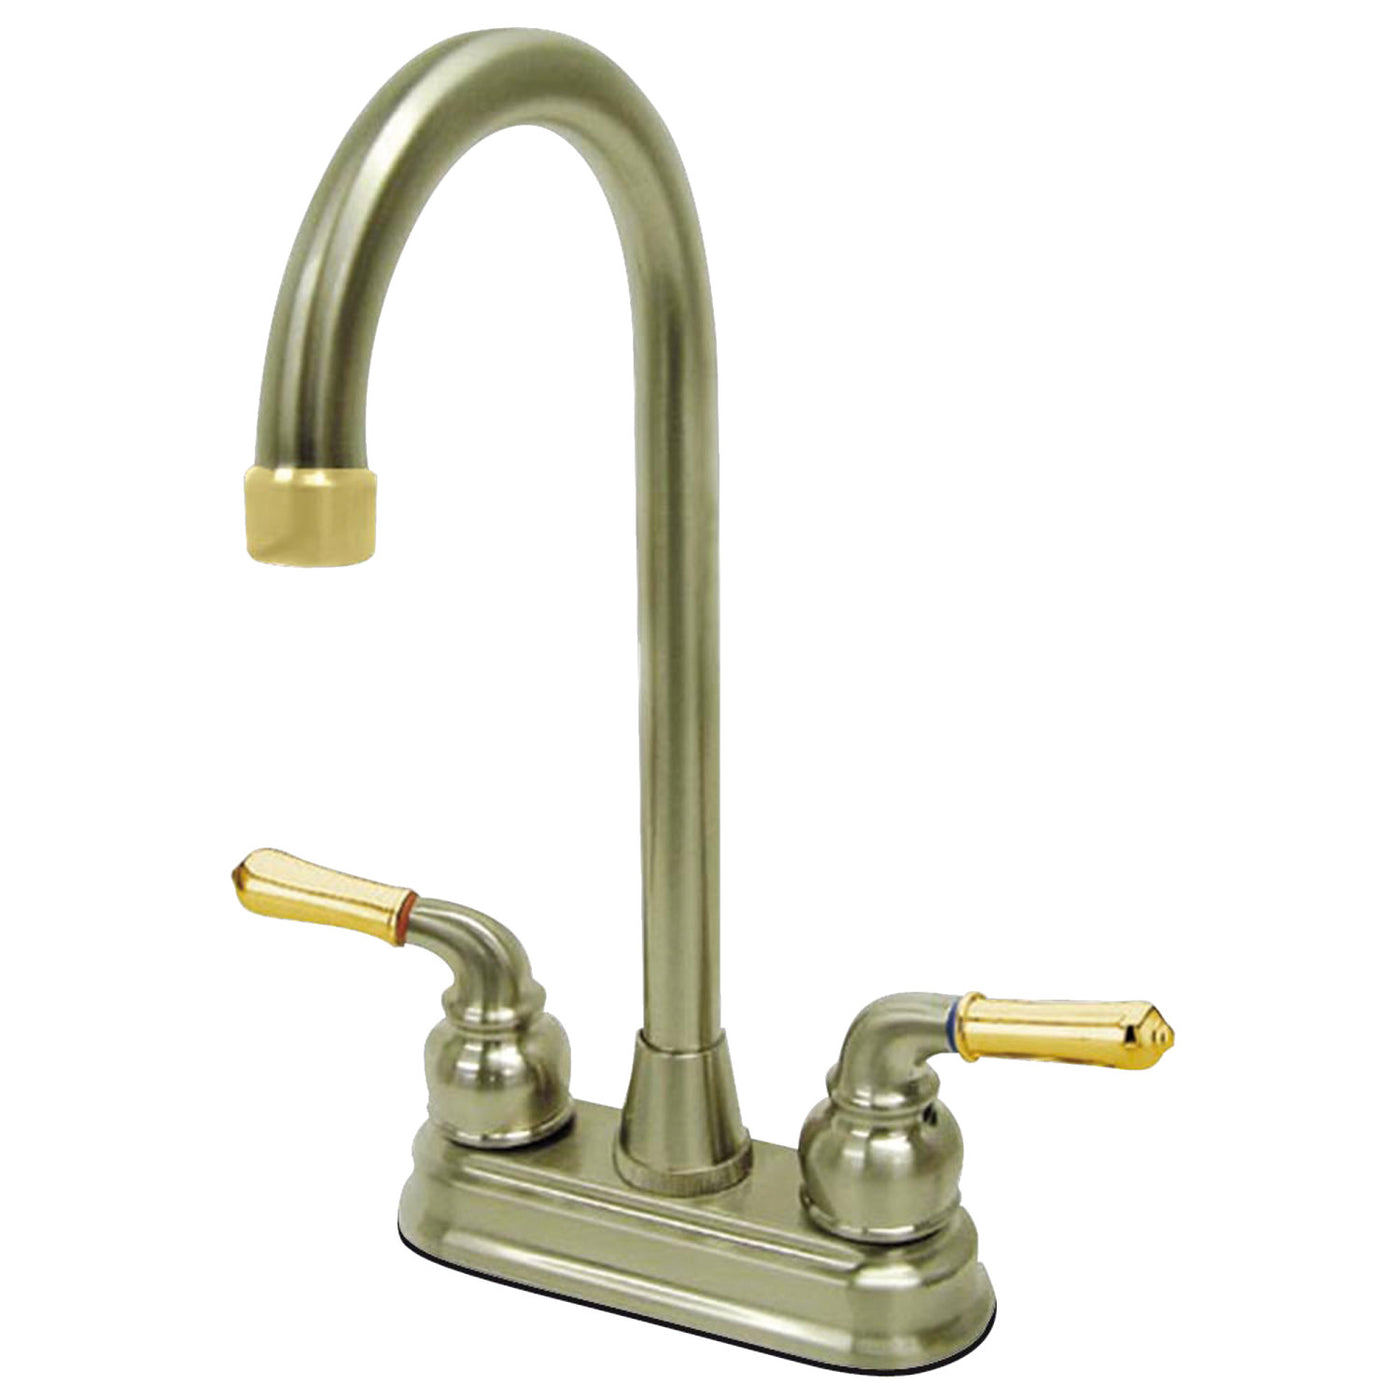 Elements of Design EB499 Two-Handle 4-Inch Centerset Bar Faucet, Brushed Nickel/Polished Brass